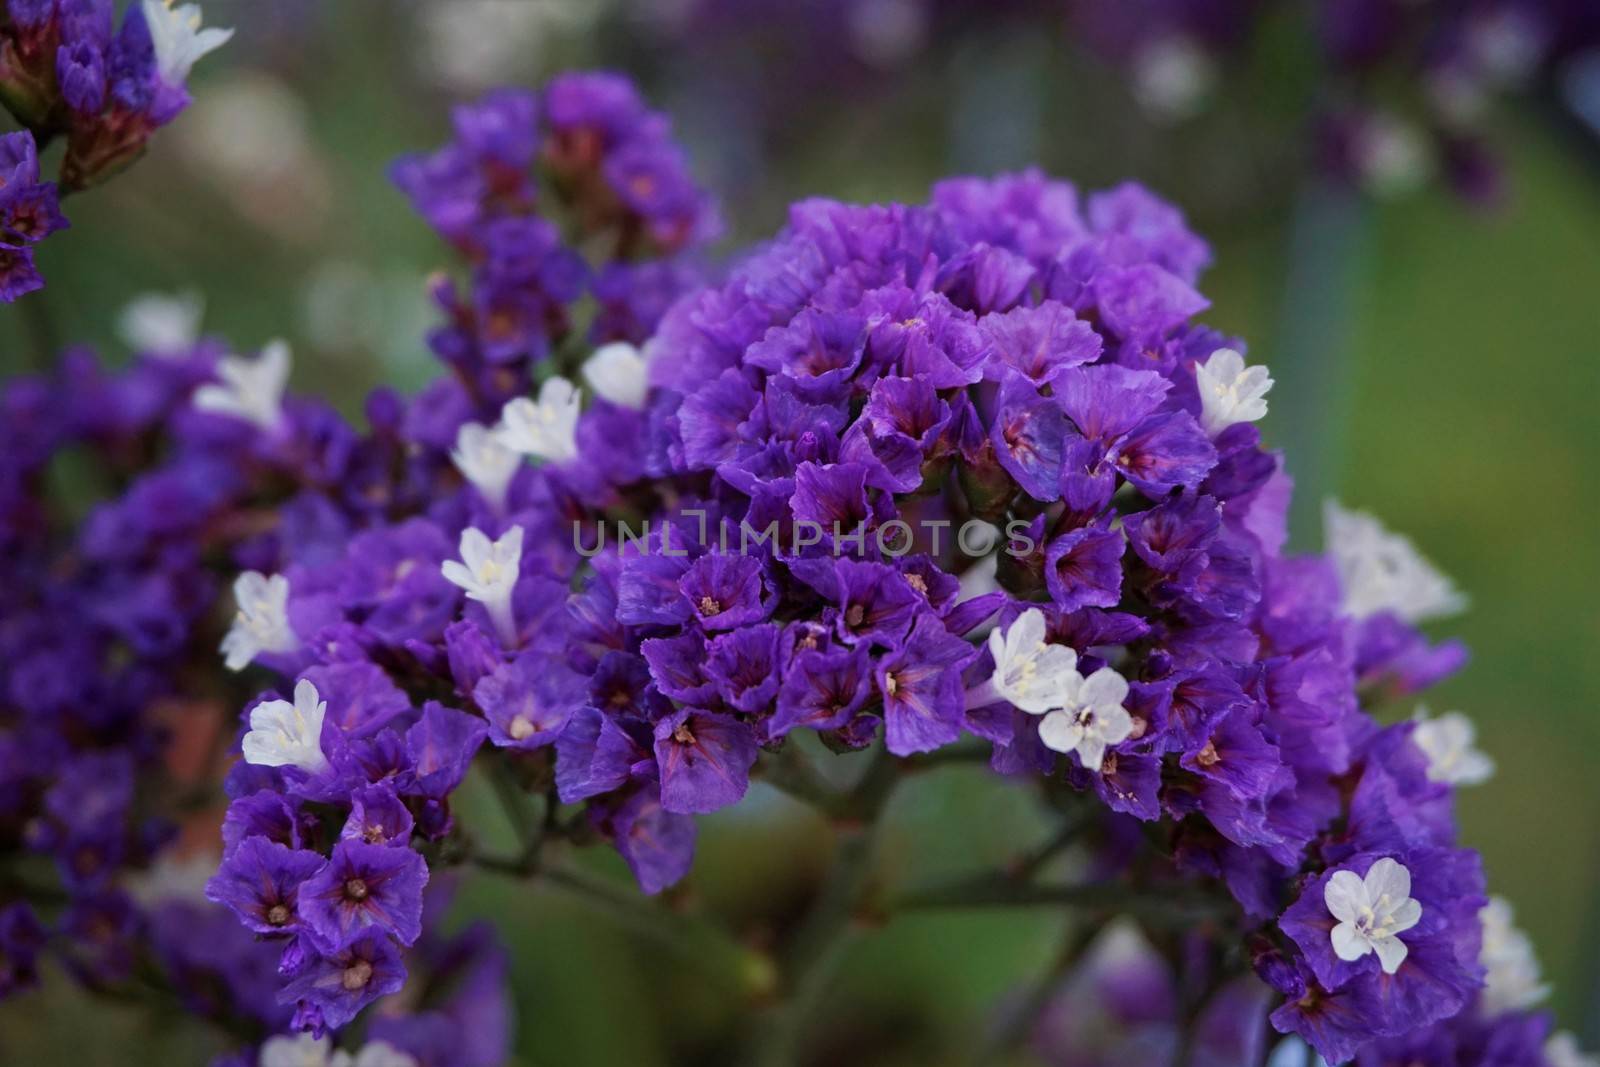 A close-up of beautiful purple sea-lavender blossoms spotted in the garden